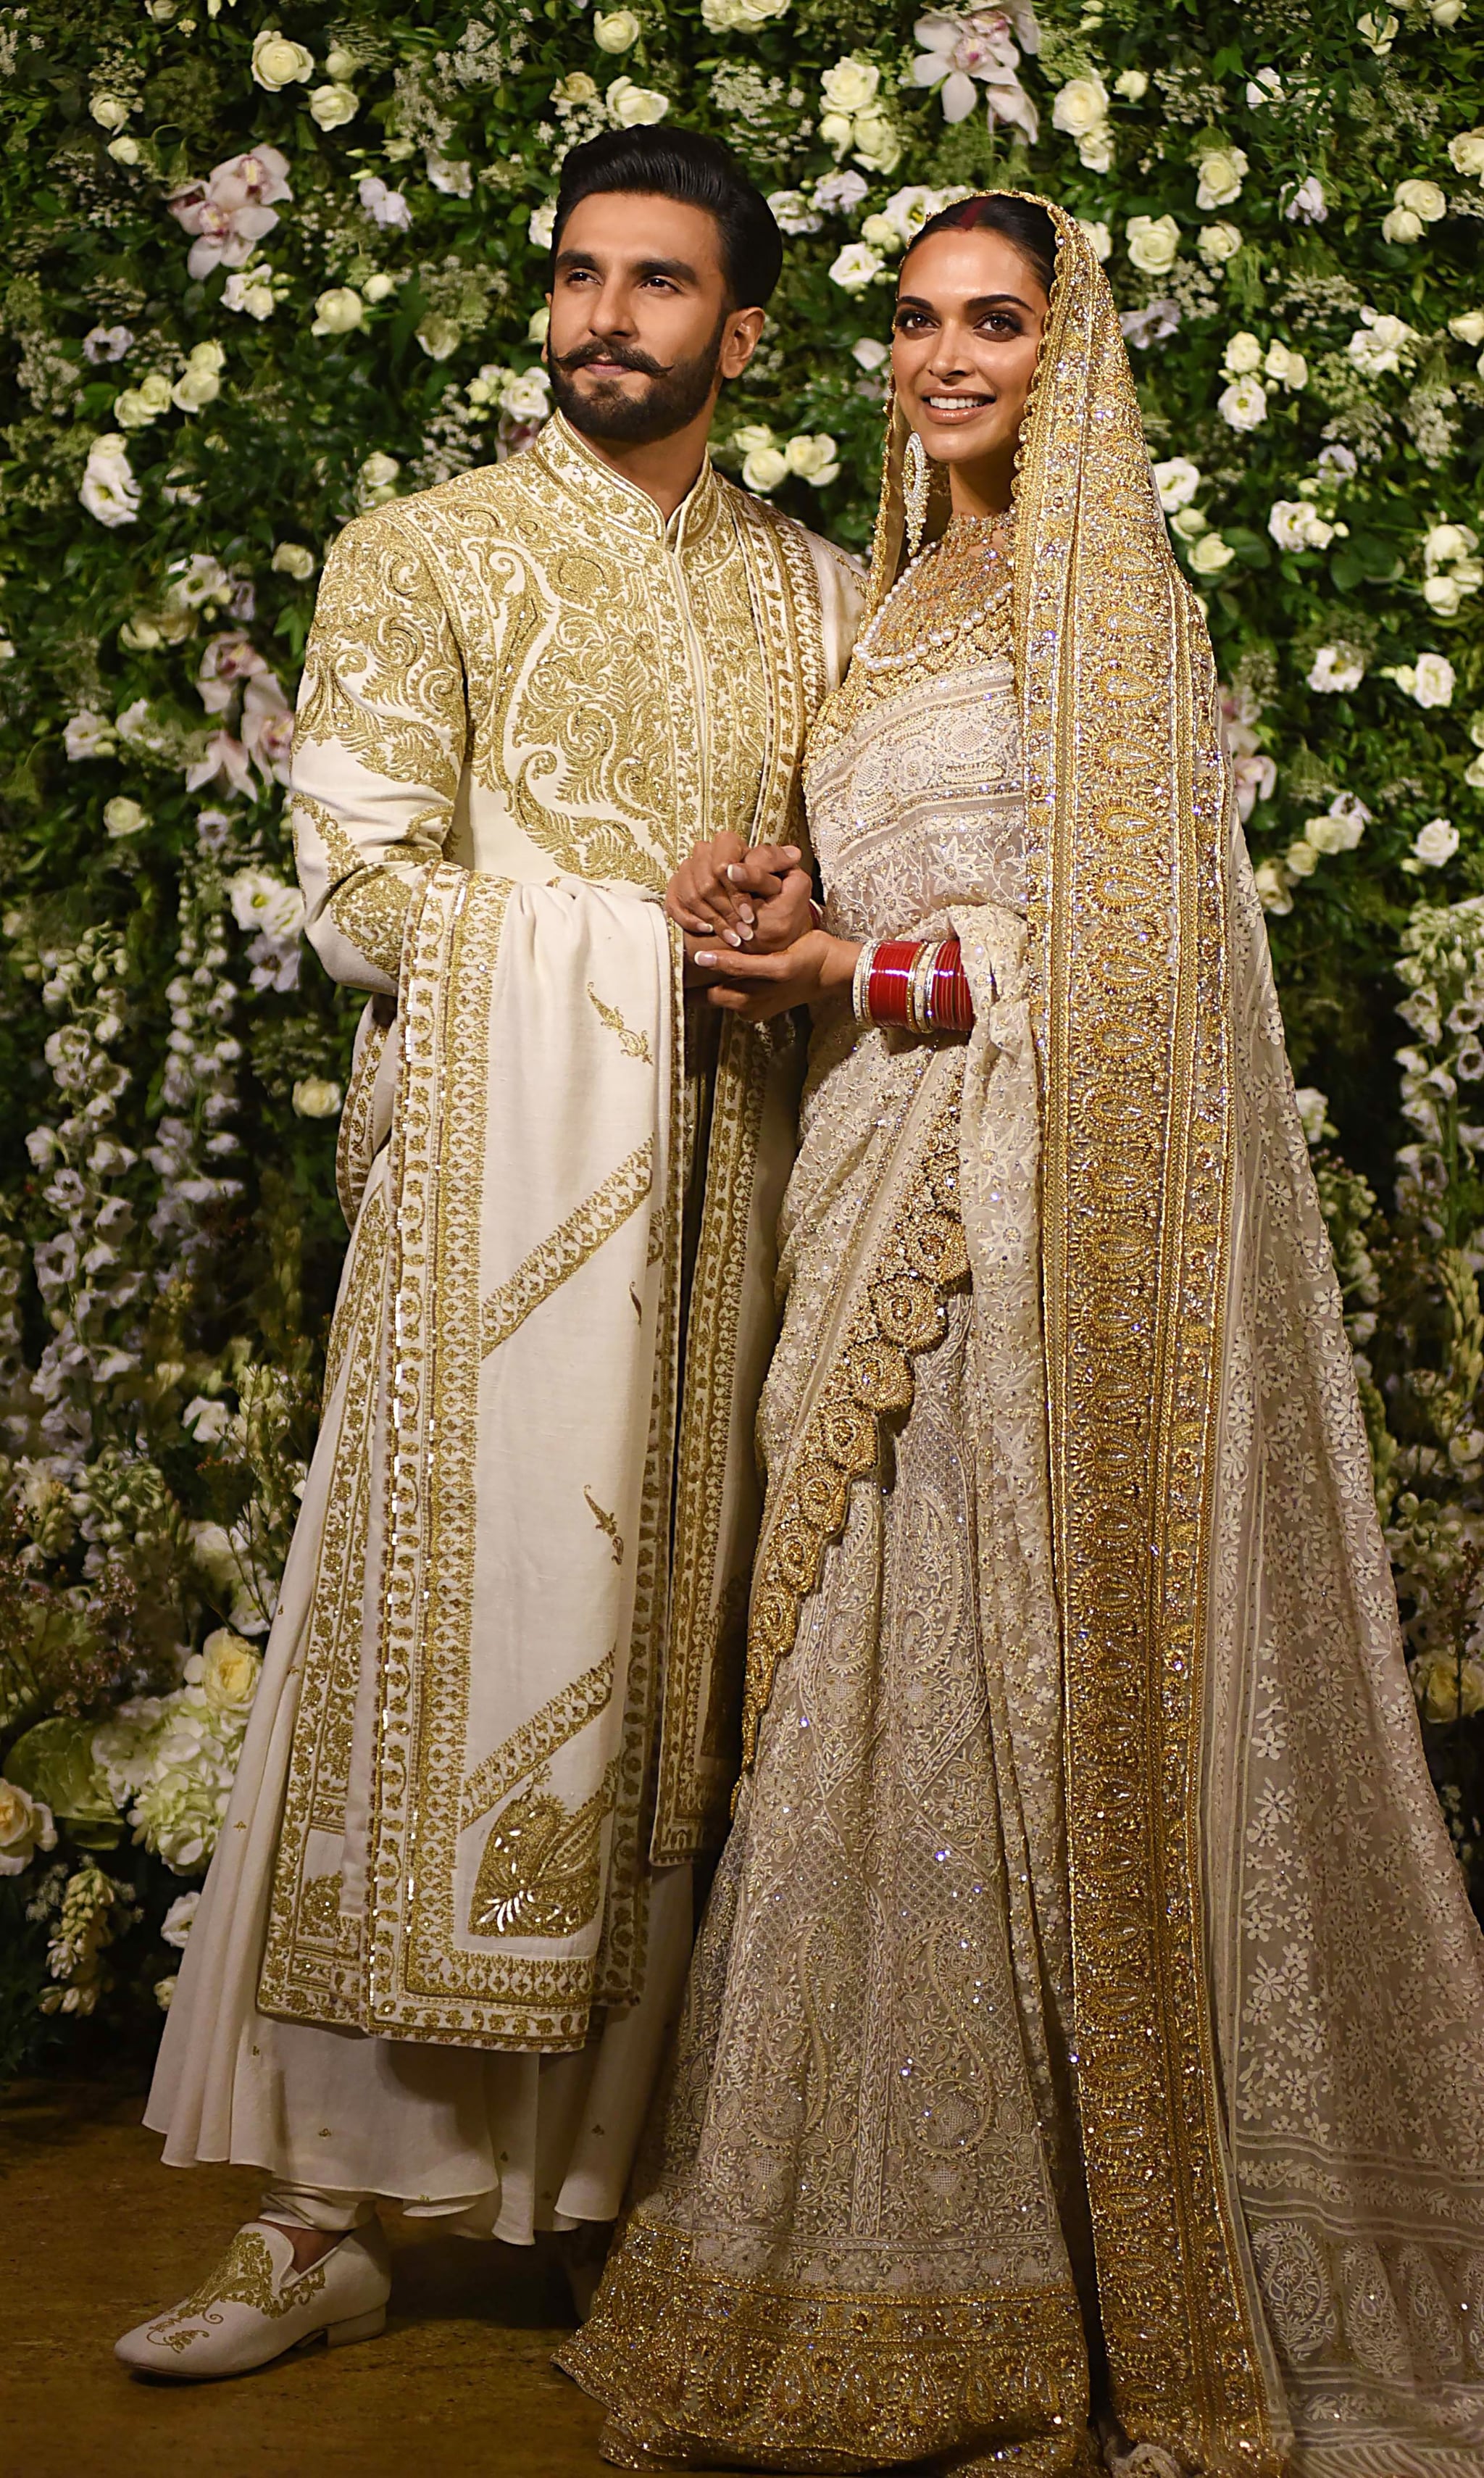 Pretty Sikh Wedding In Mumbai With Stunning Designer Outfits & Wedding  Looks To Swoon Over! - Witty Vows